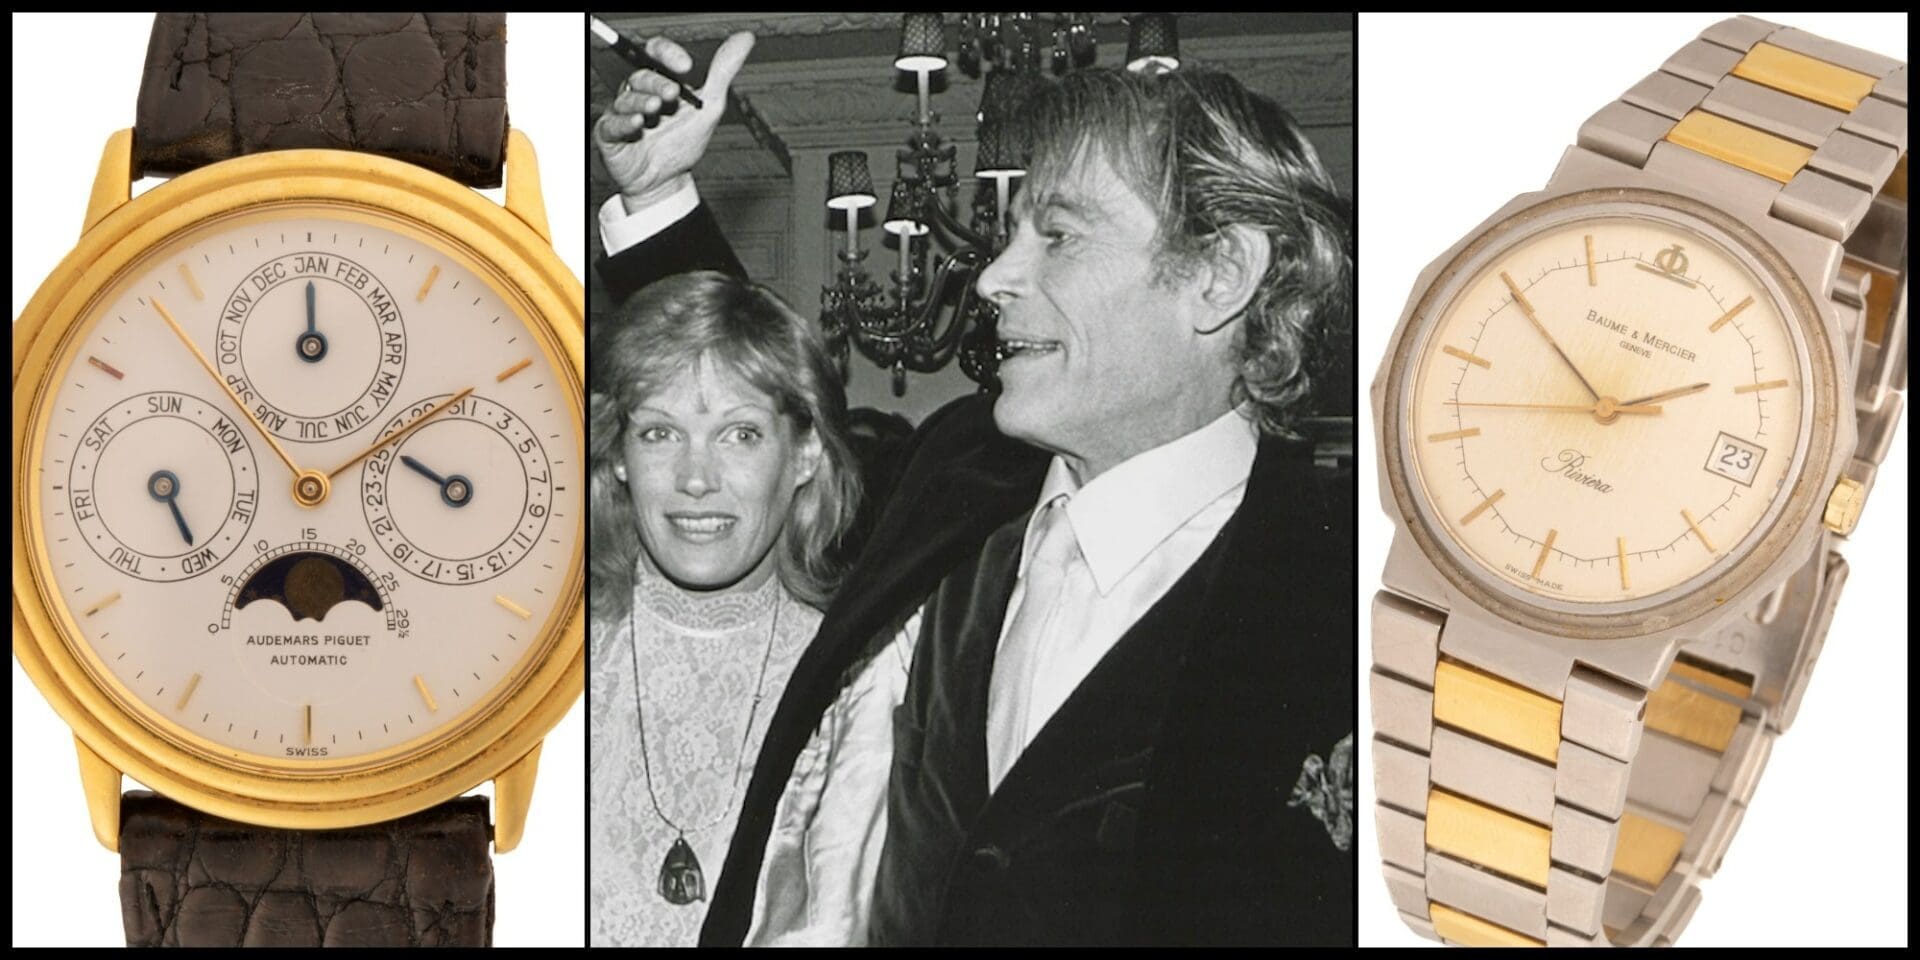 The crazy drinking stories about Peter O’Toole that’ll make you want to buy his watches